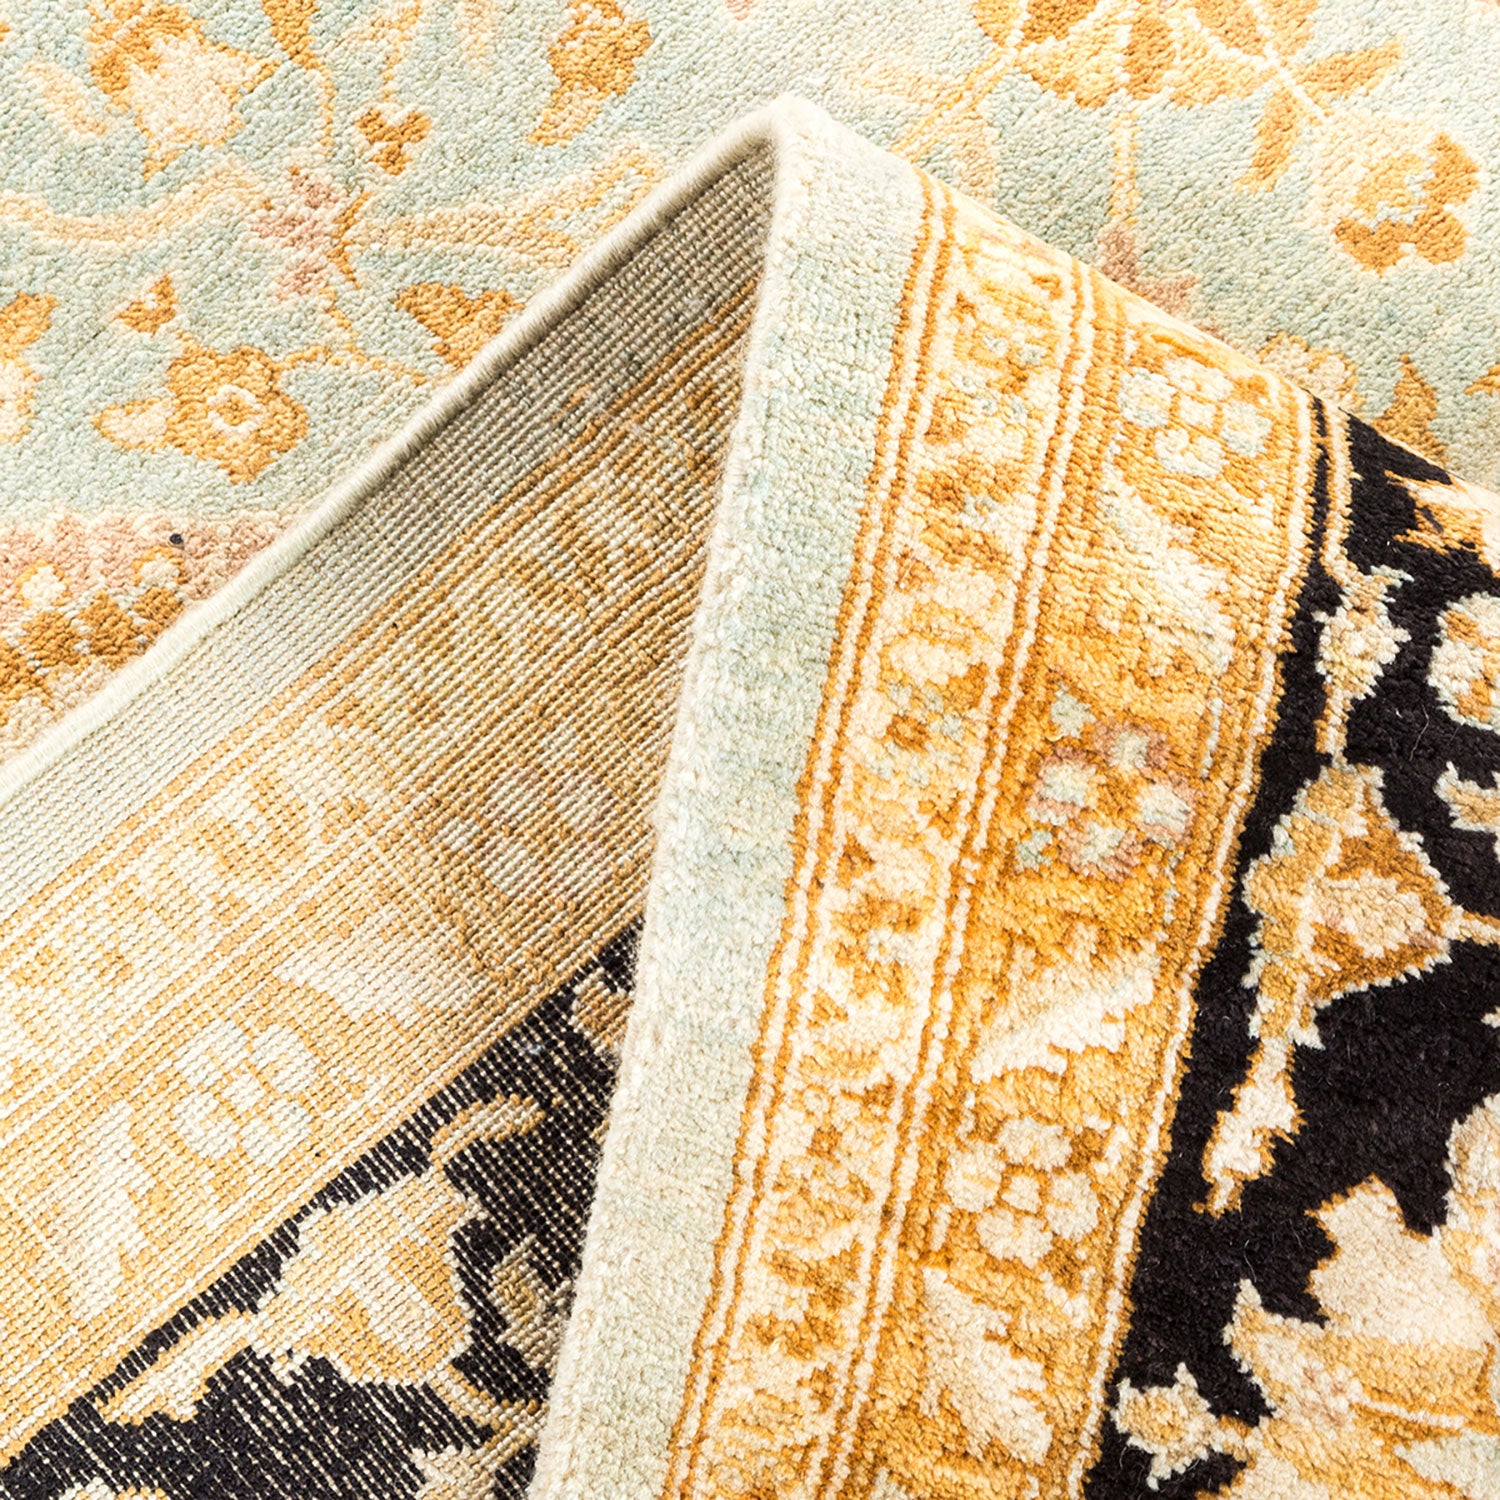 Close-up of two contrasting carpets with different patterns and colors.